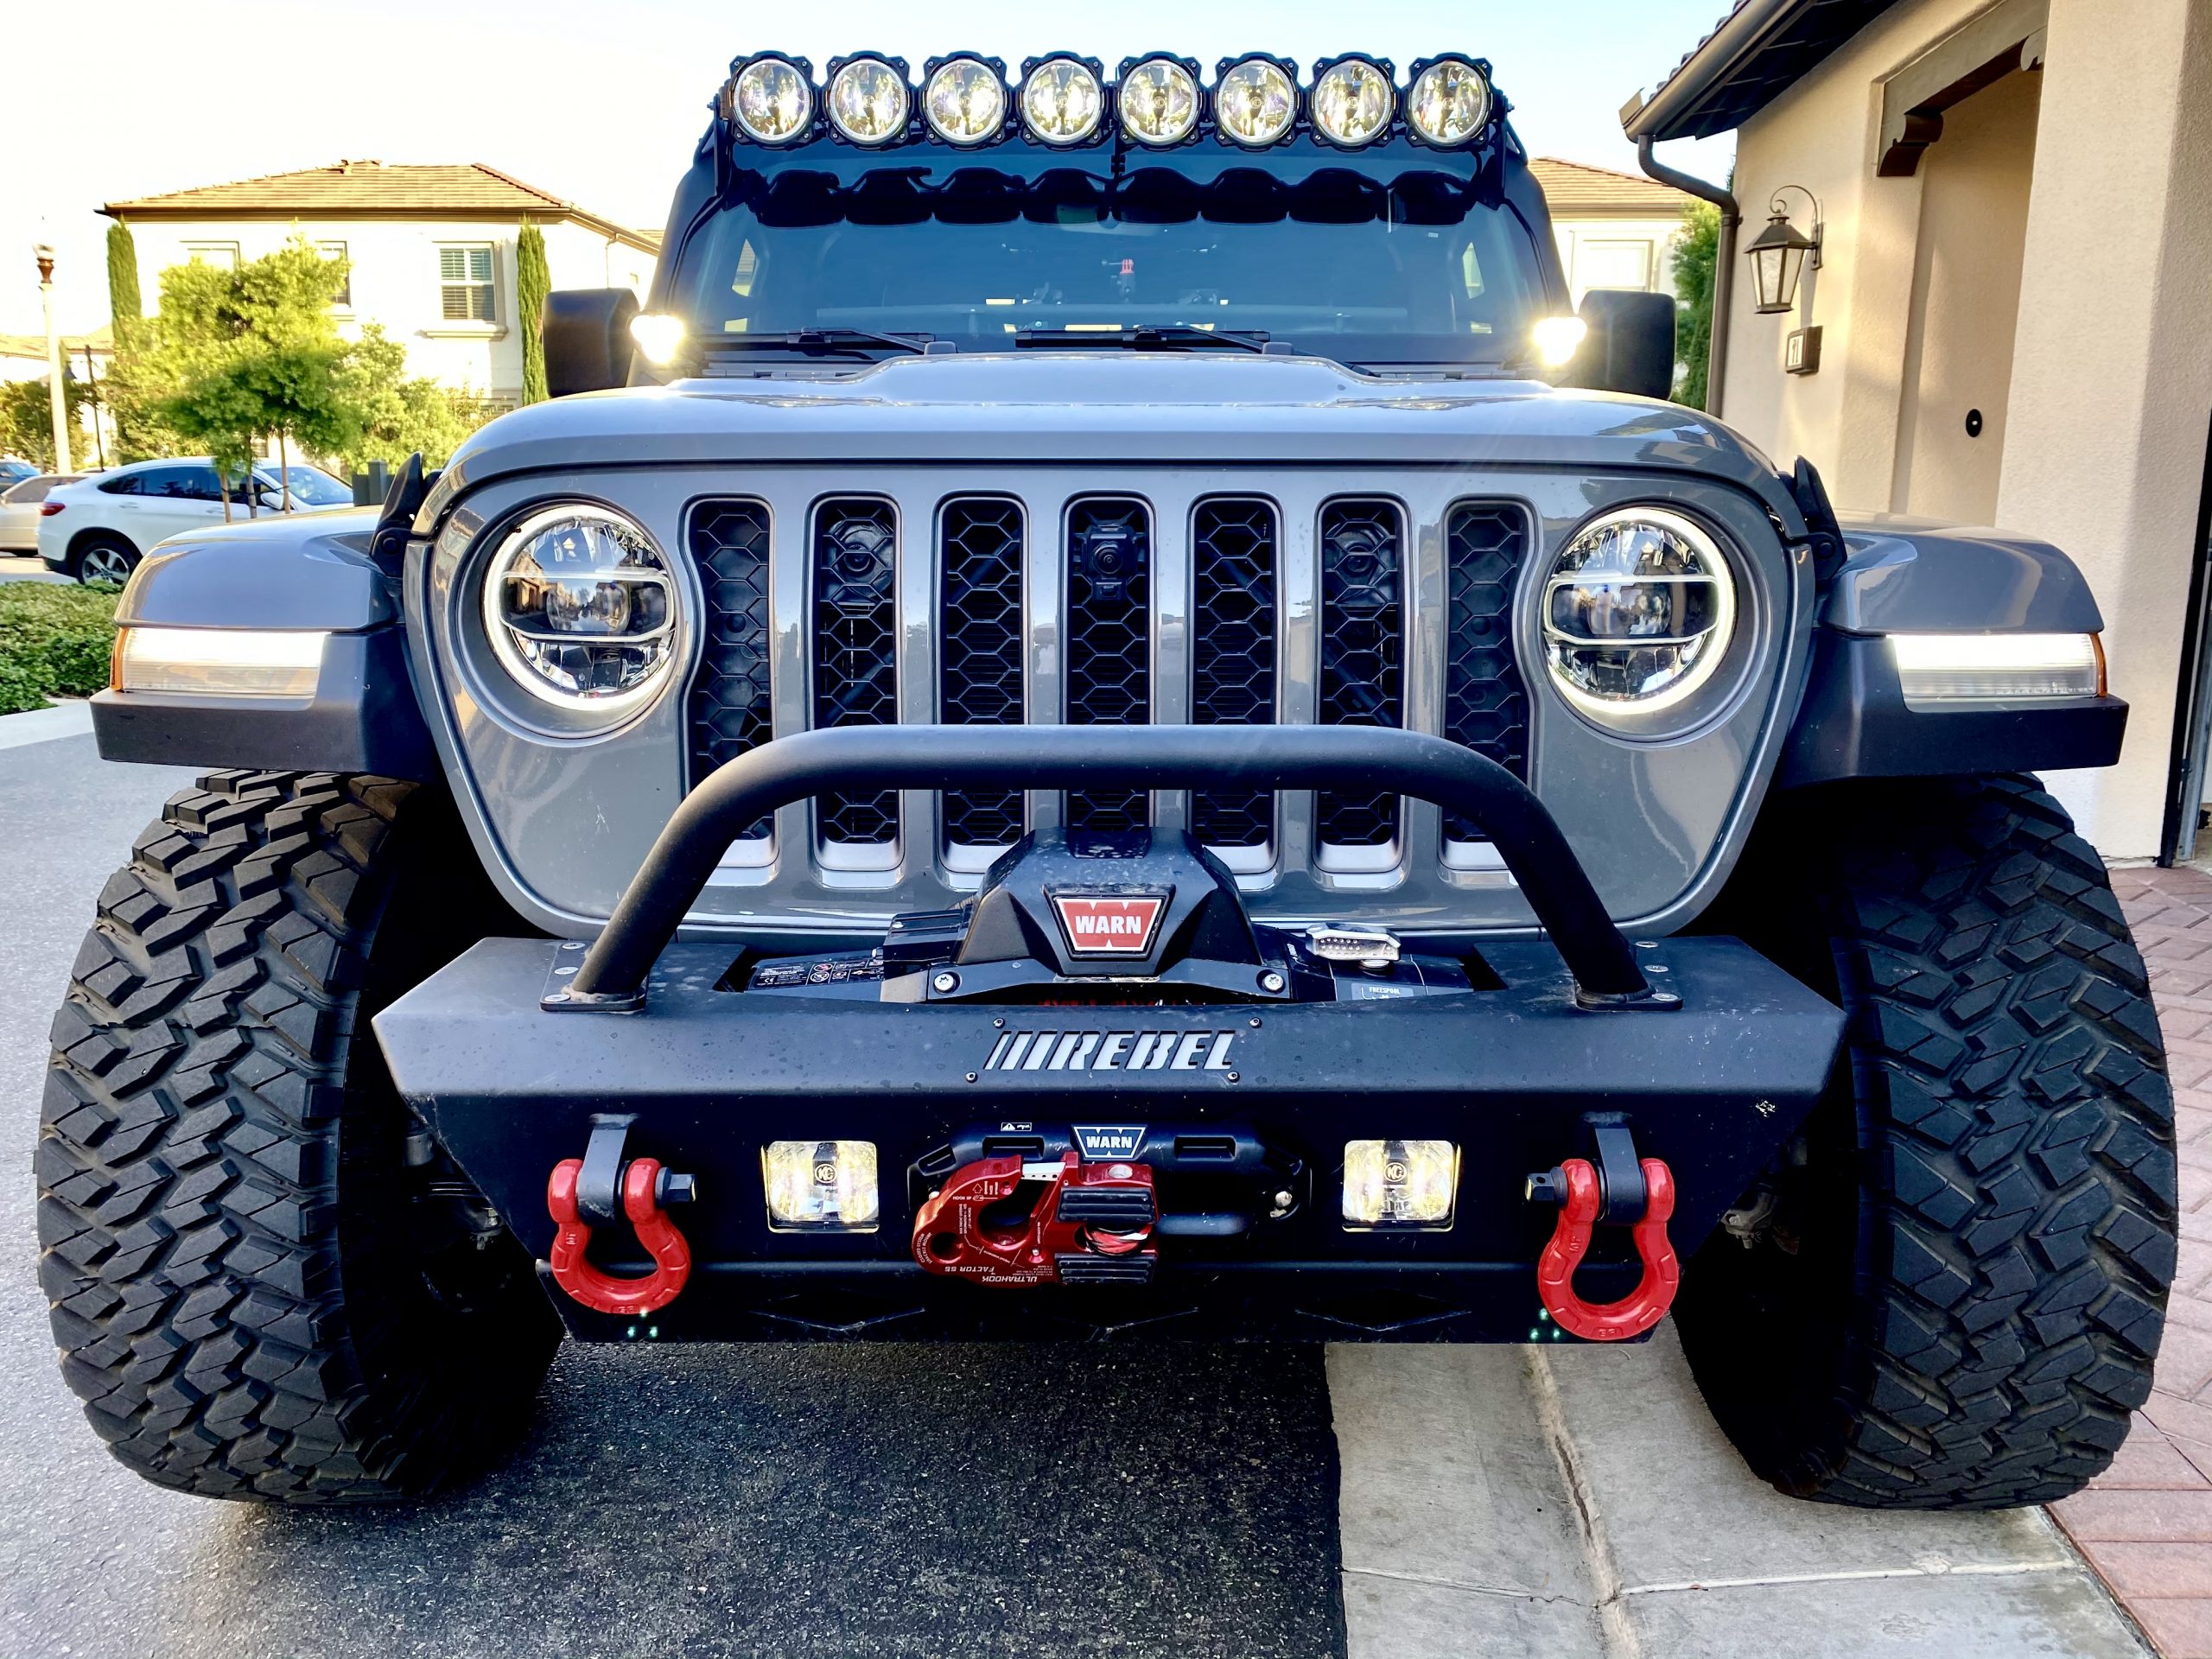 Nitto Trail Grappler review - warn zeon 10 winch install 